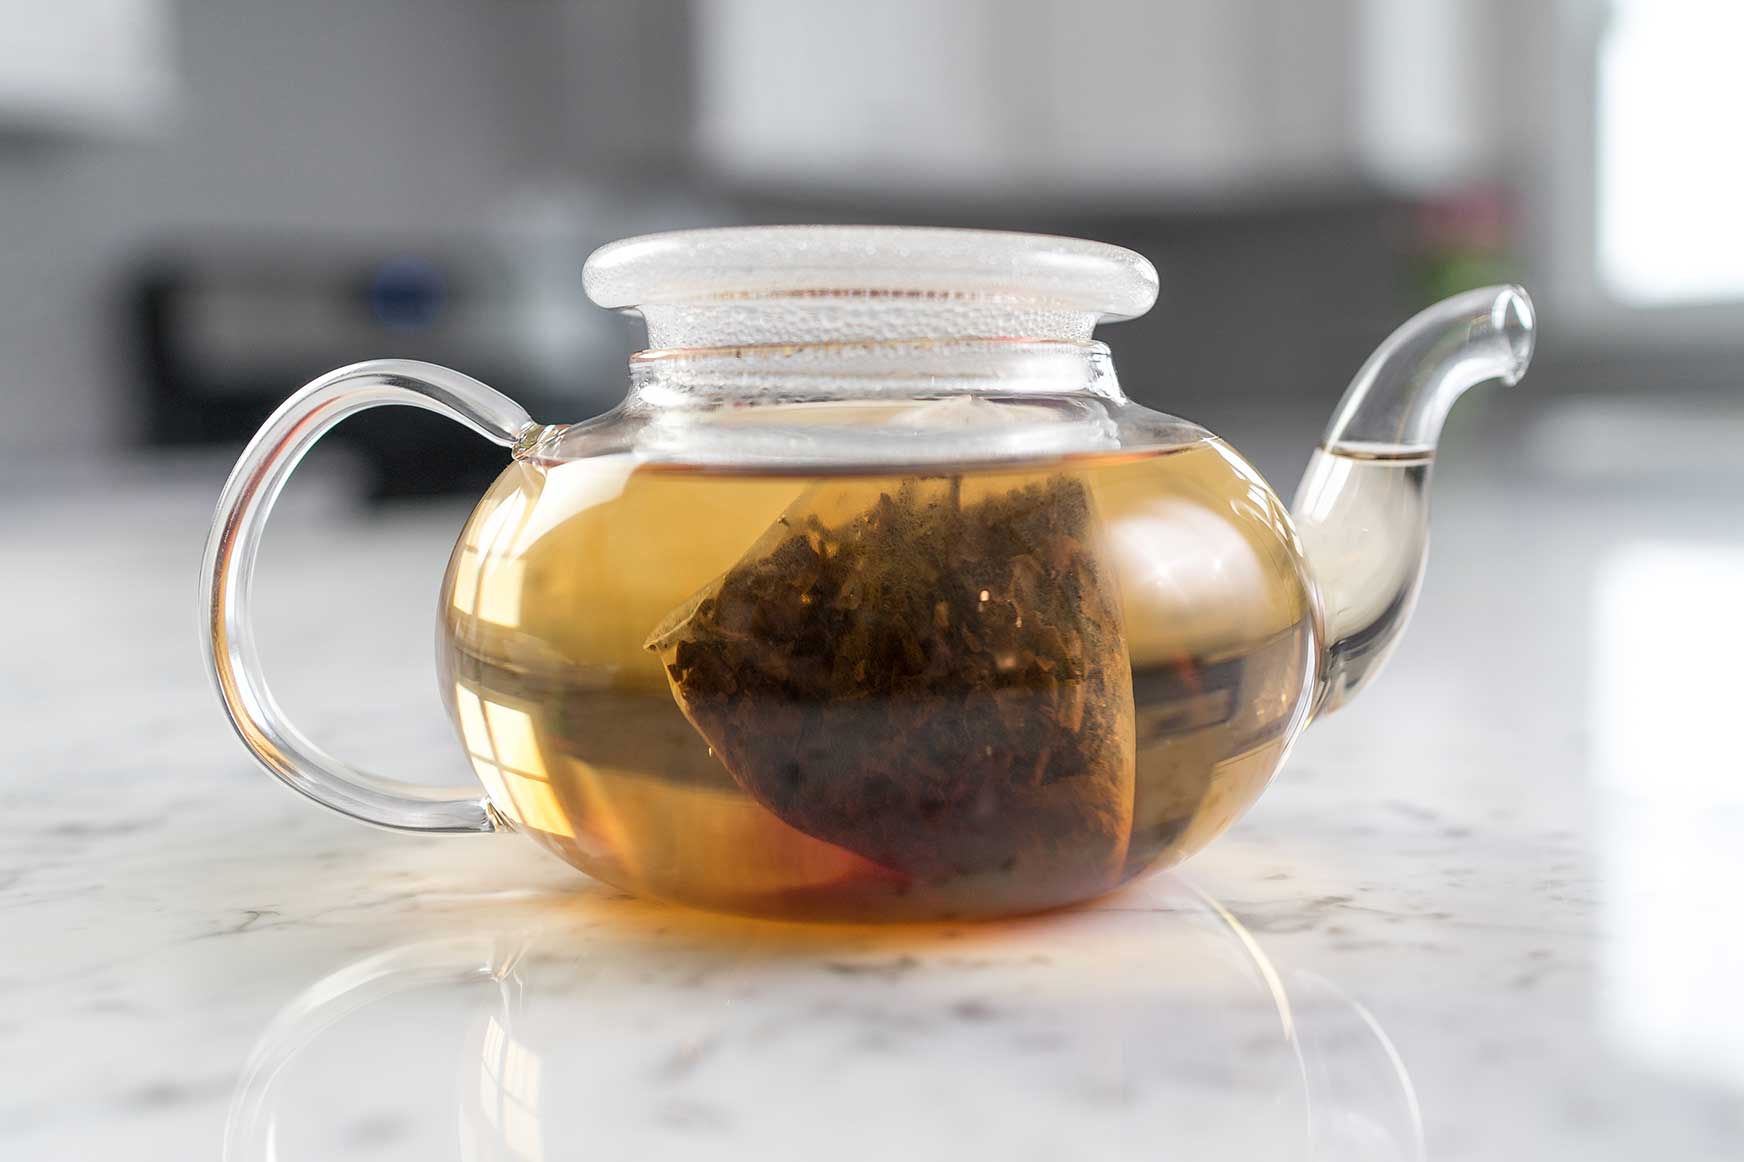 One Earth® biodegradable, compostable tea bag in glass teapot